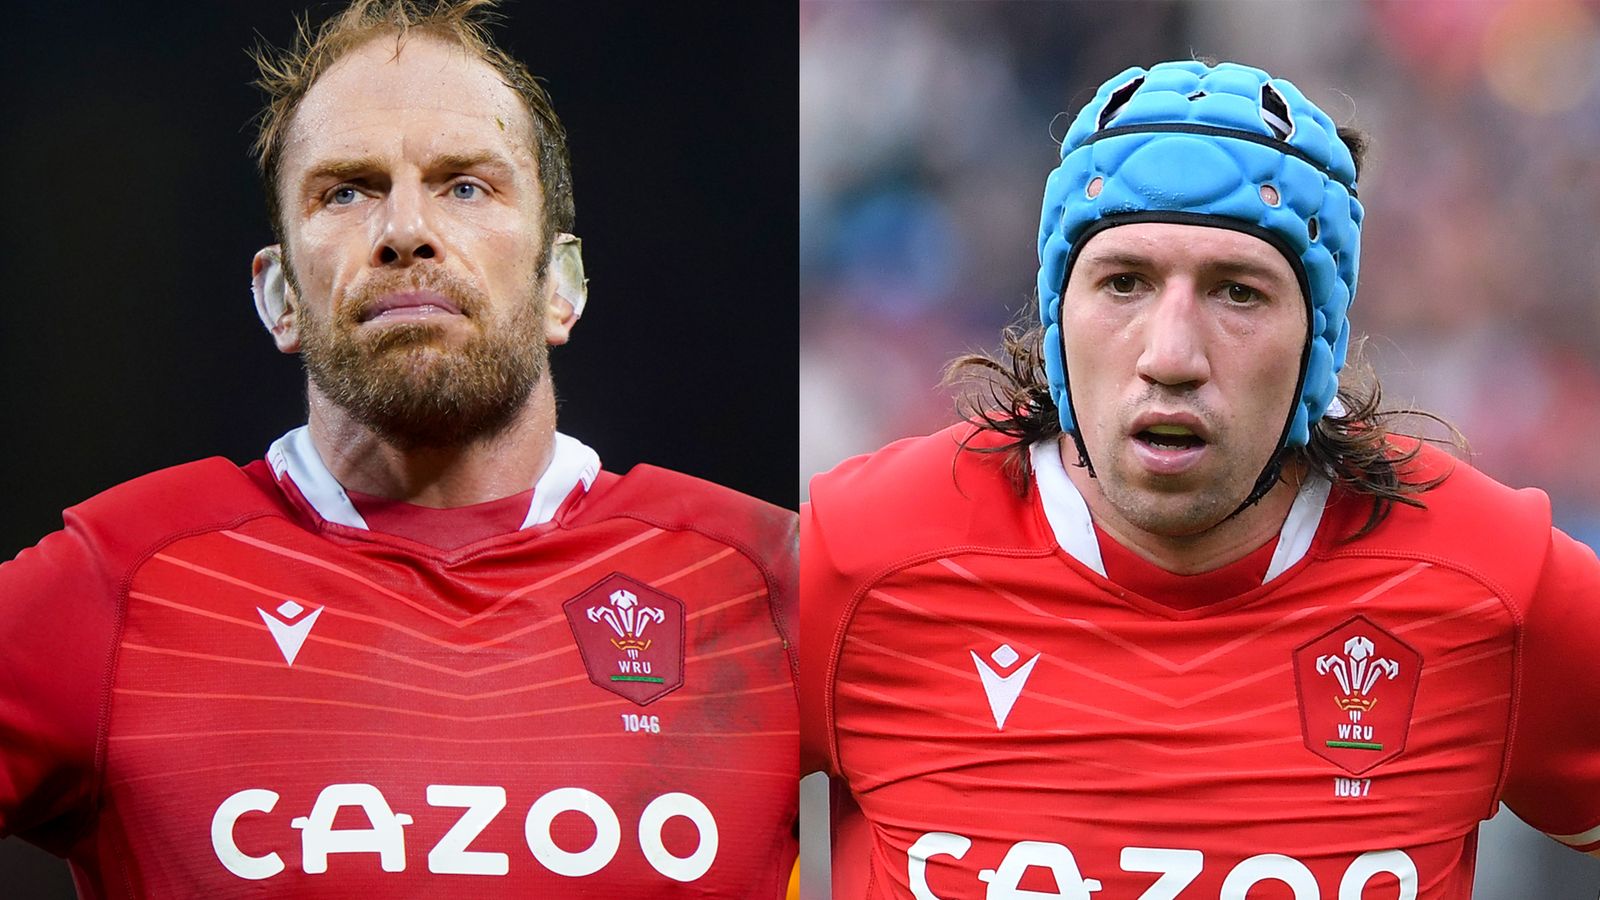 Alun Wyn Jones and Justin Tipuric: Experienced Wales duo retire from international rugby four months before World Cup | Rugby Union News